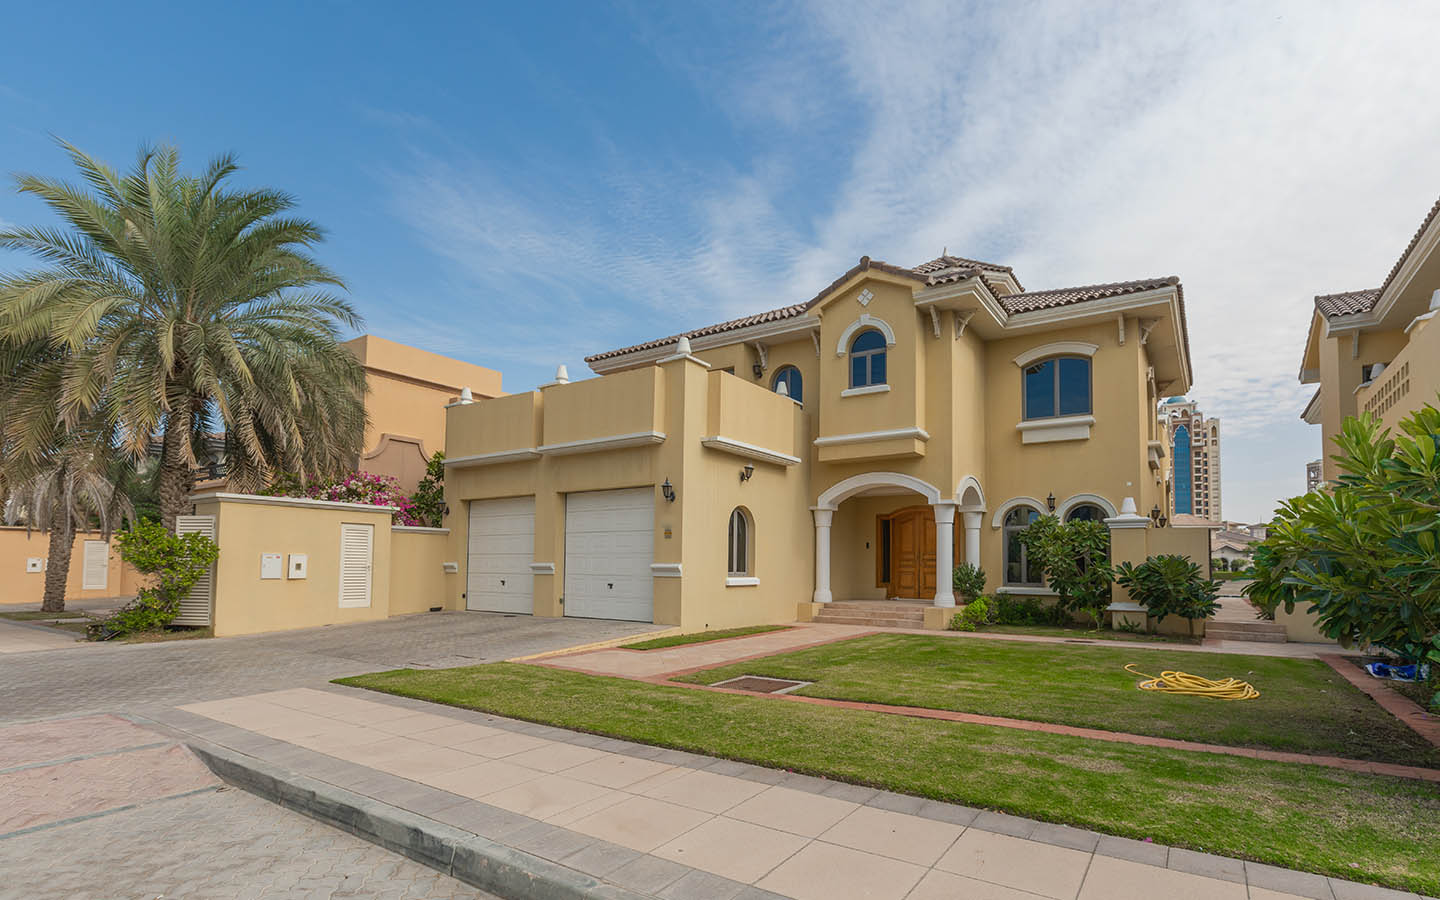 Mirdif is one of the Popular areas to rent 4-bed villas under AED 200k in Dubai